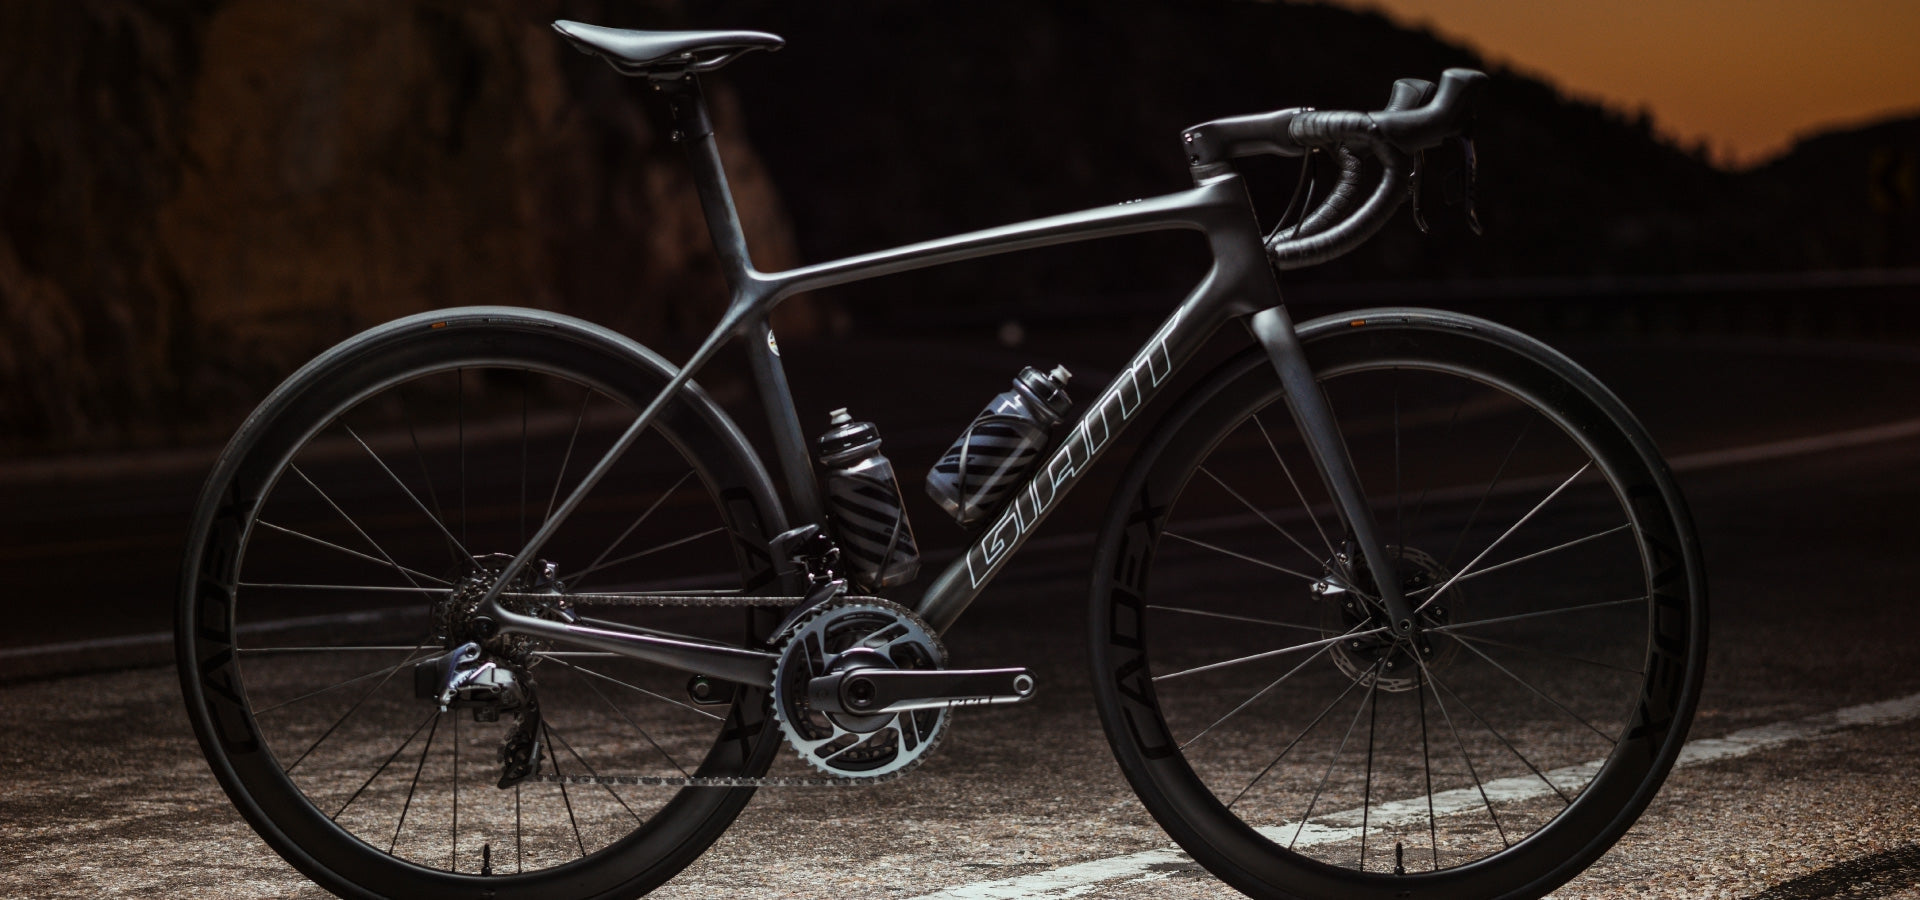 Giant 2021 TCR - 9th generation frame is lighter, stiffer and more aerodynamic